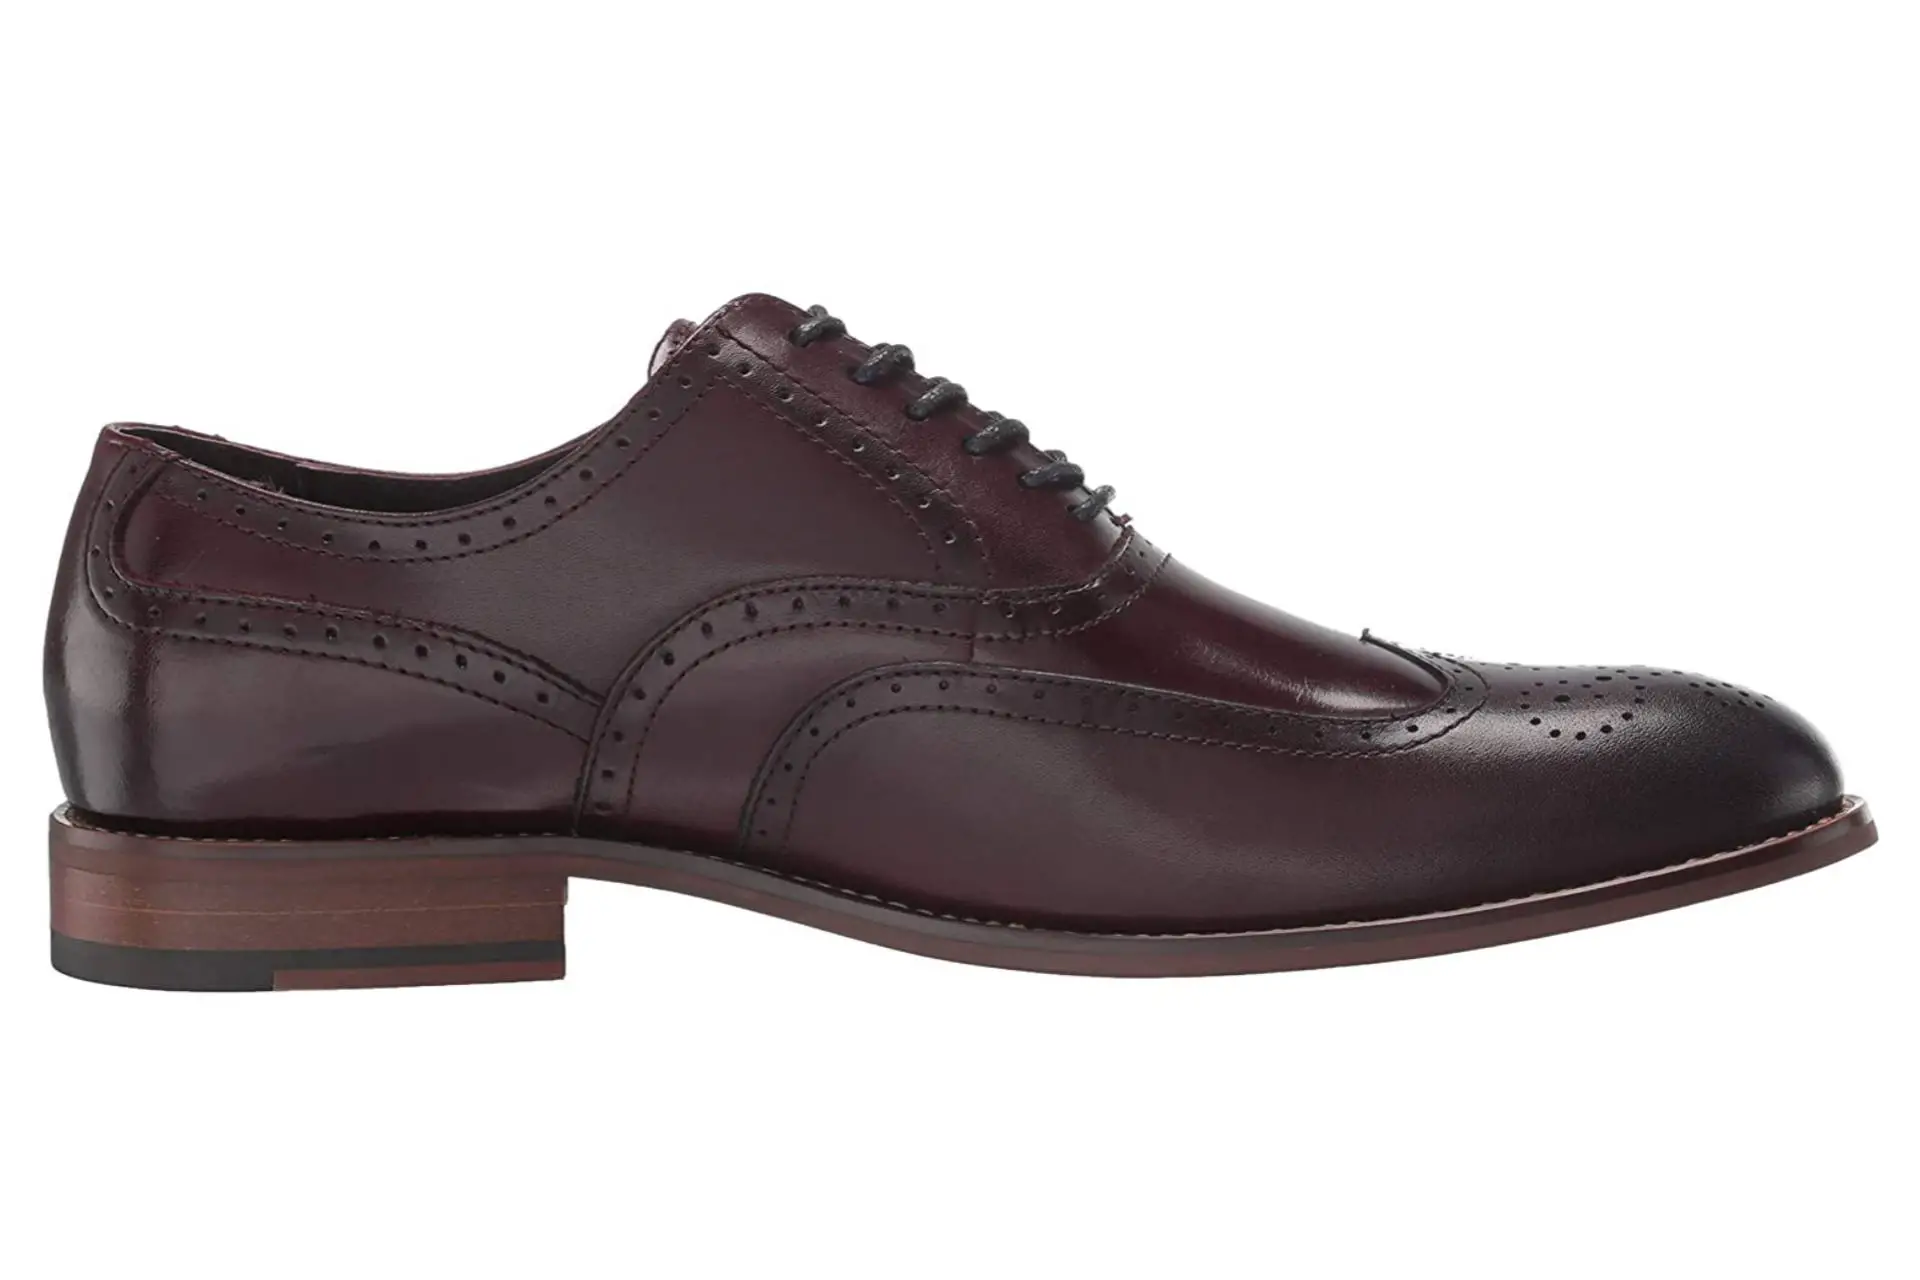 Work oxford shoes for men